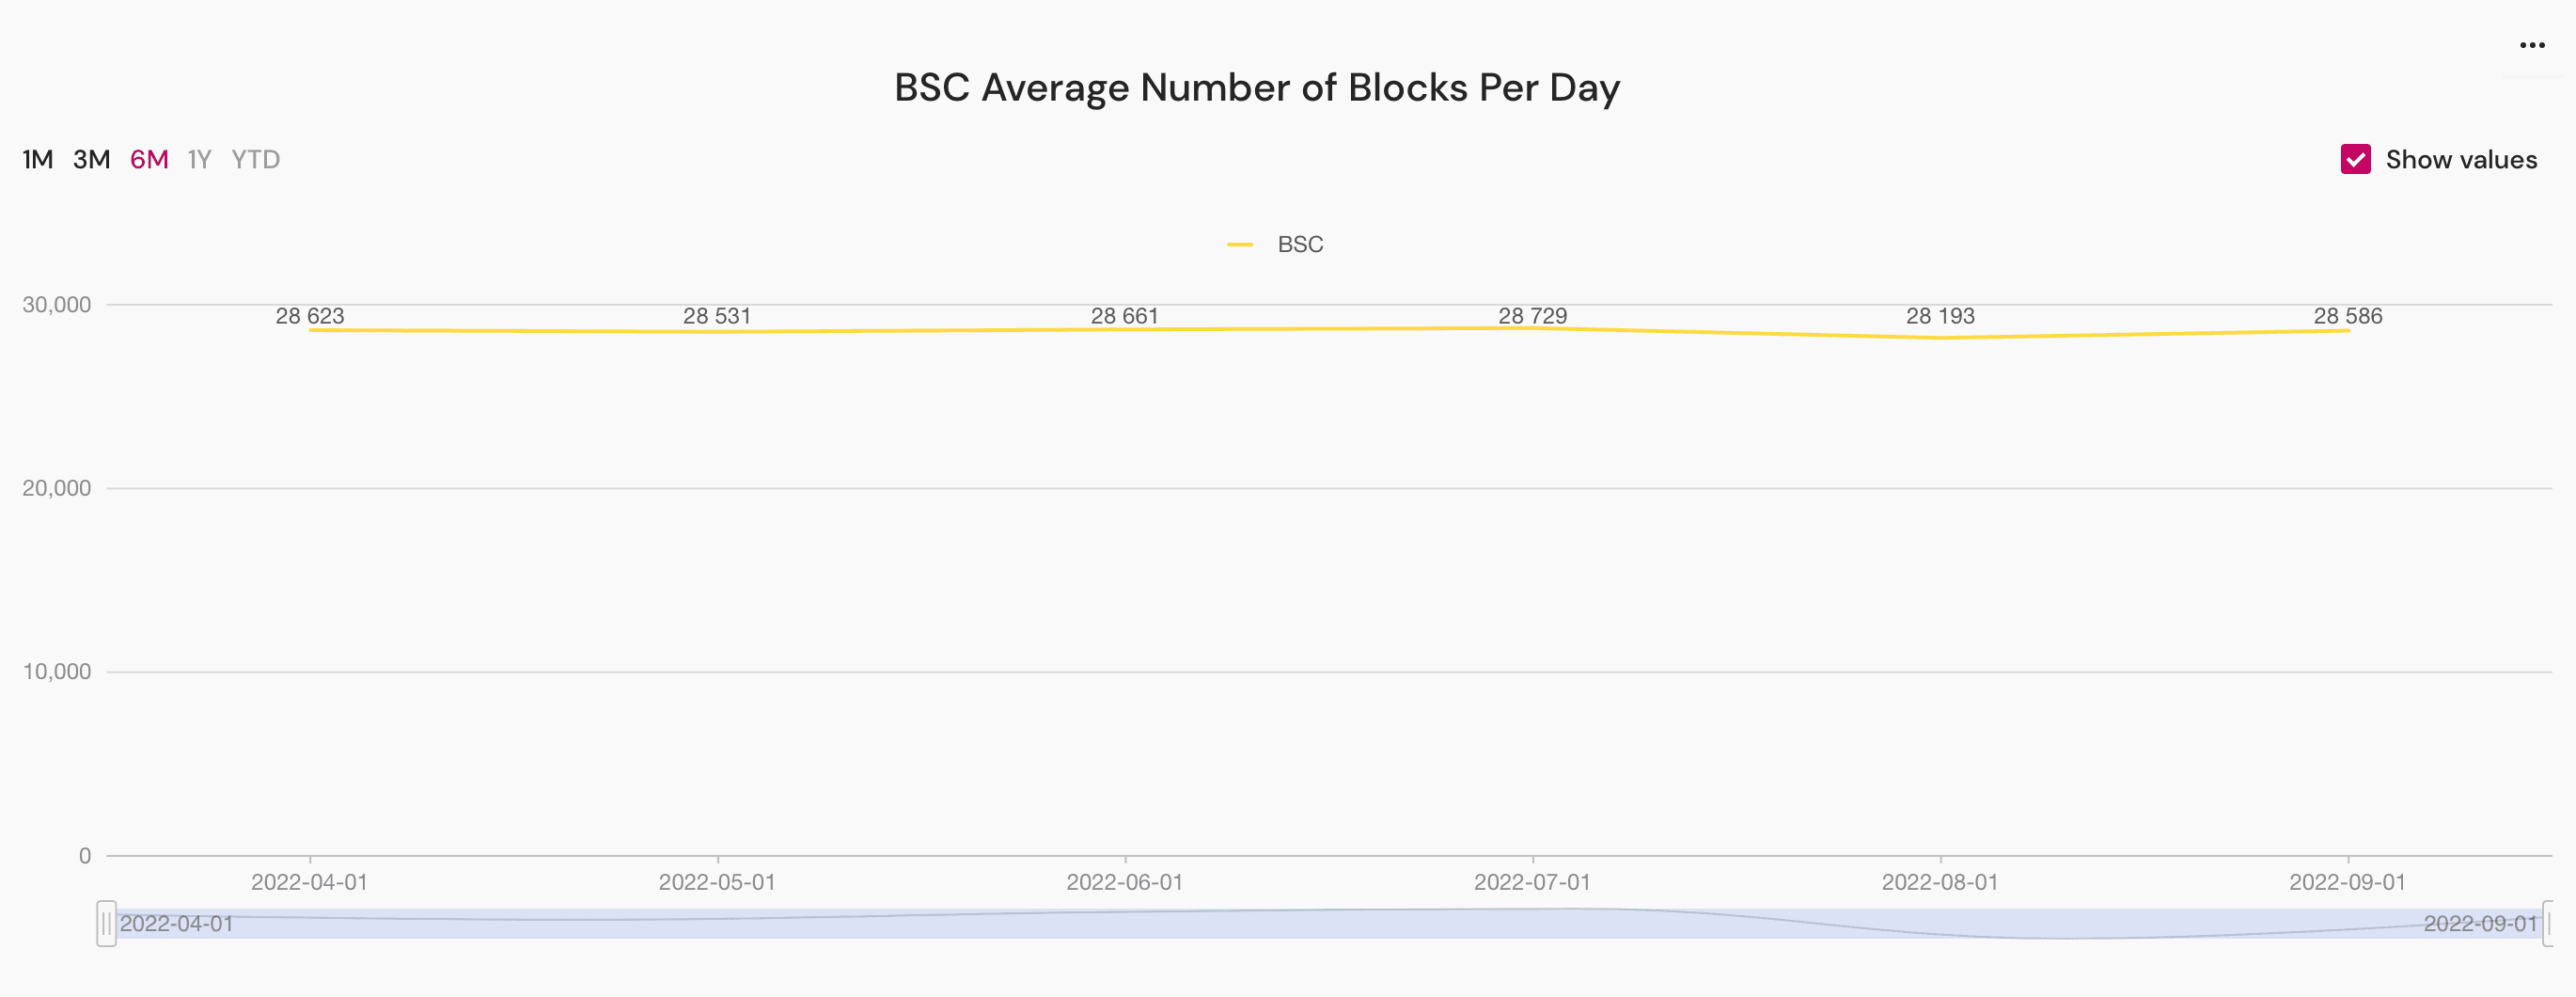 BSC average number of blocks per day